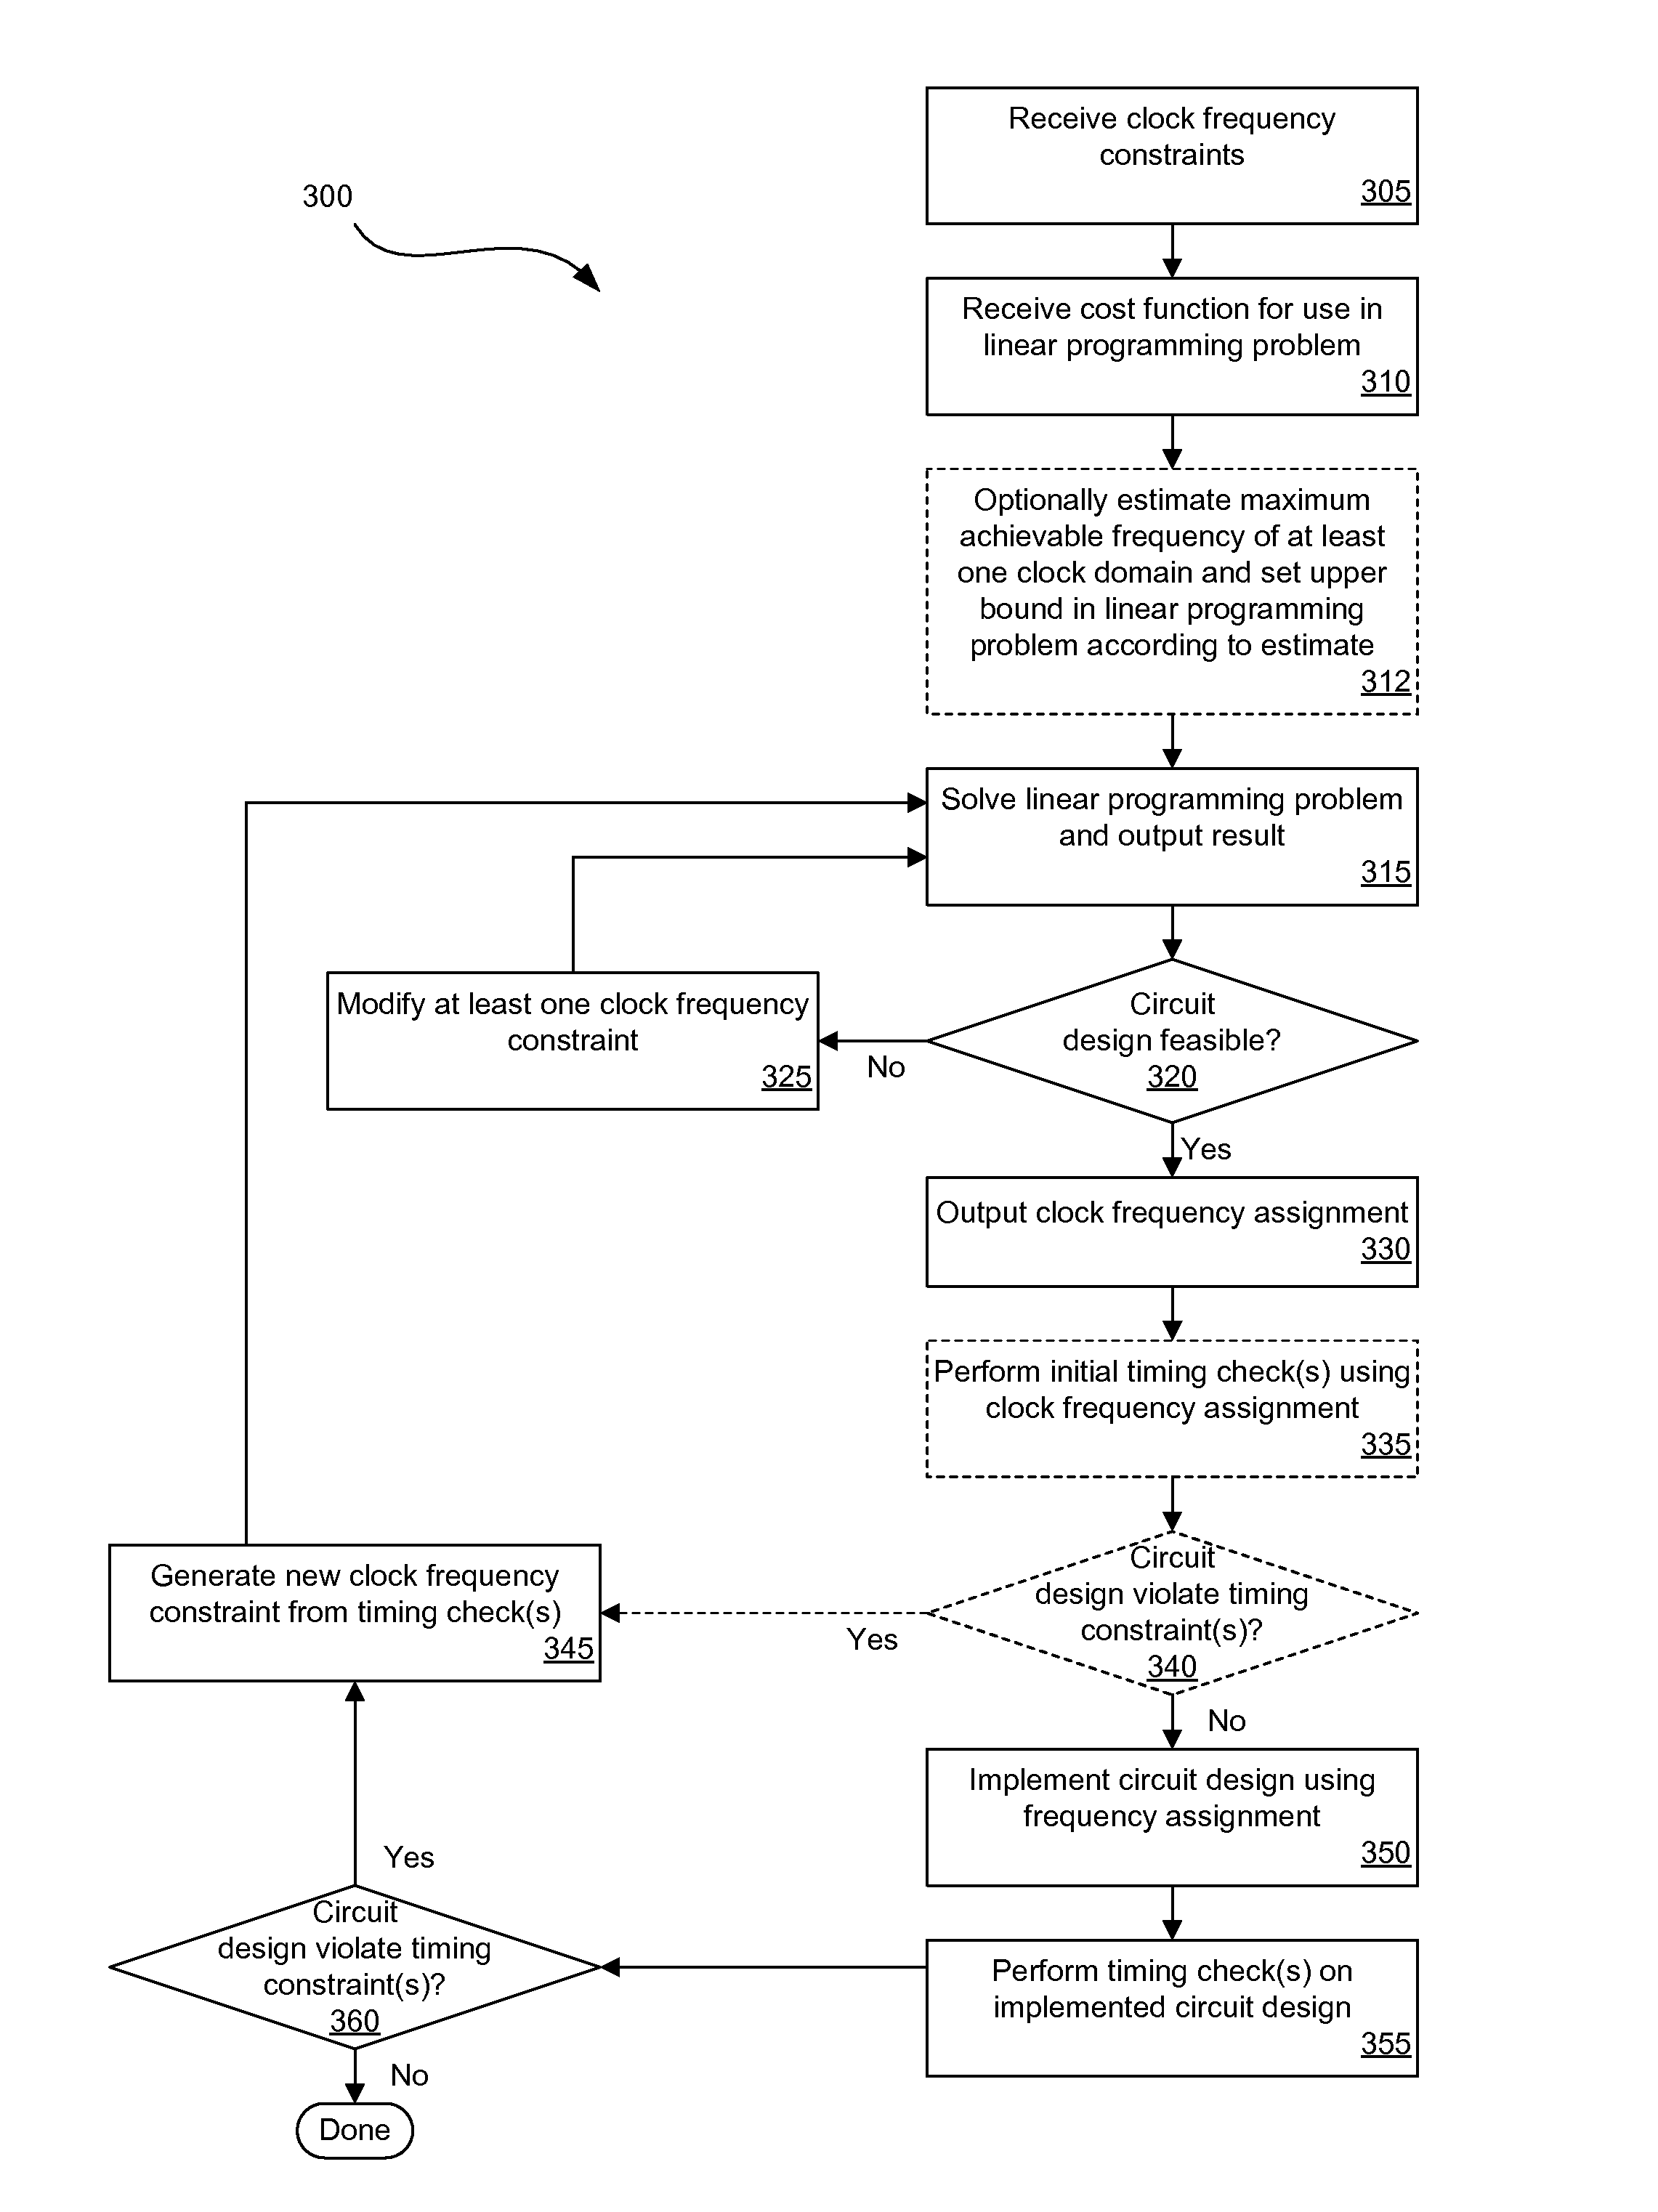 Clock frequency exploration for circuit designs having multiple clock domains